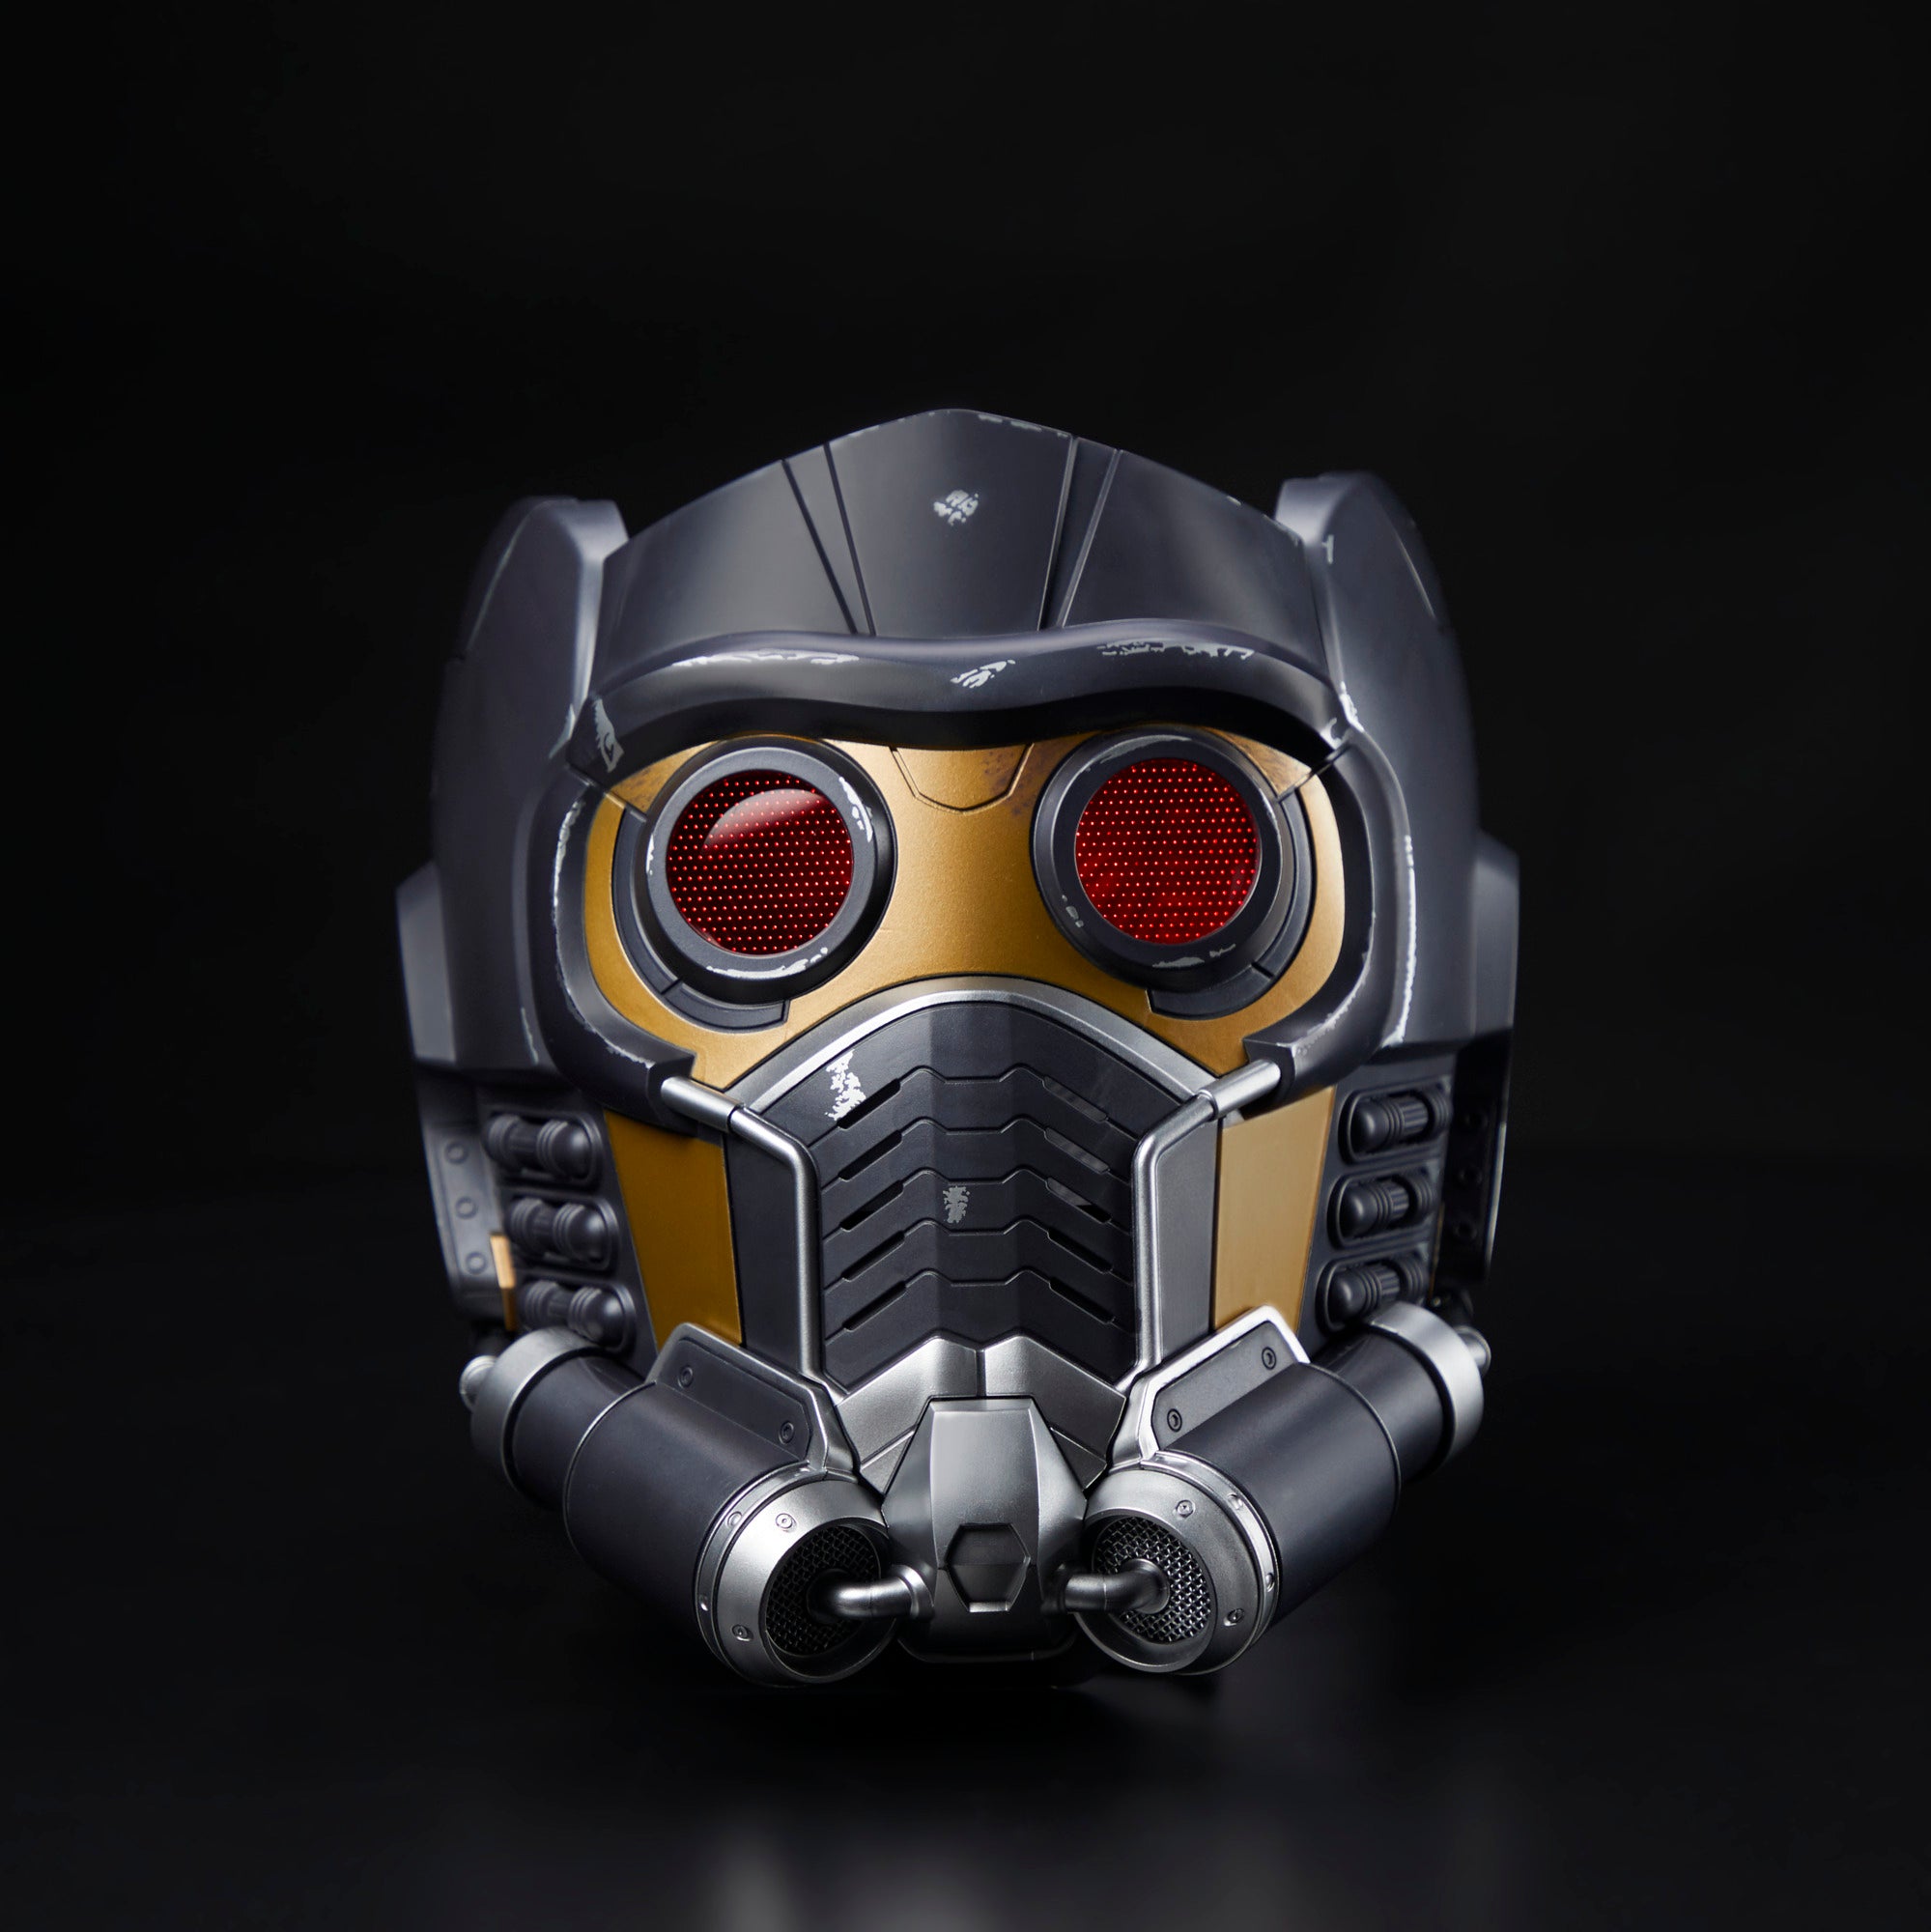 frekvens relæ Rendition Marvel Legends Series Star-Lord Electronic Role Play Helmet – Hasbro Pulse